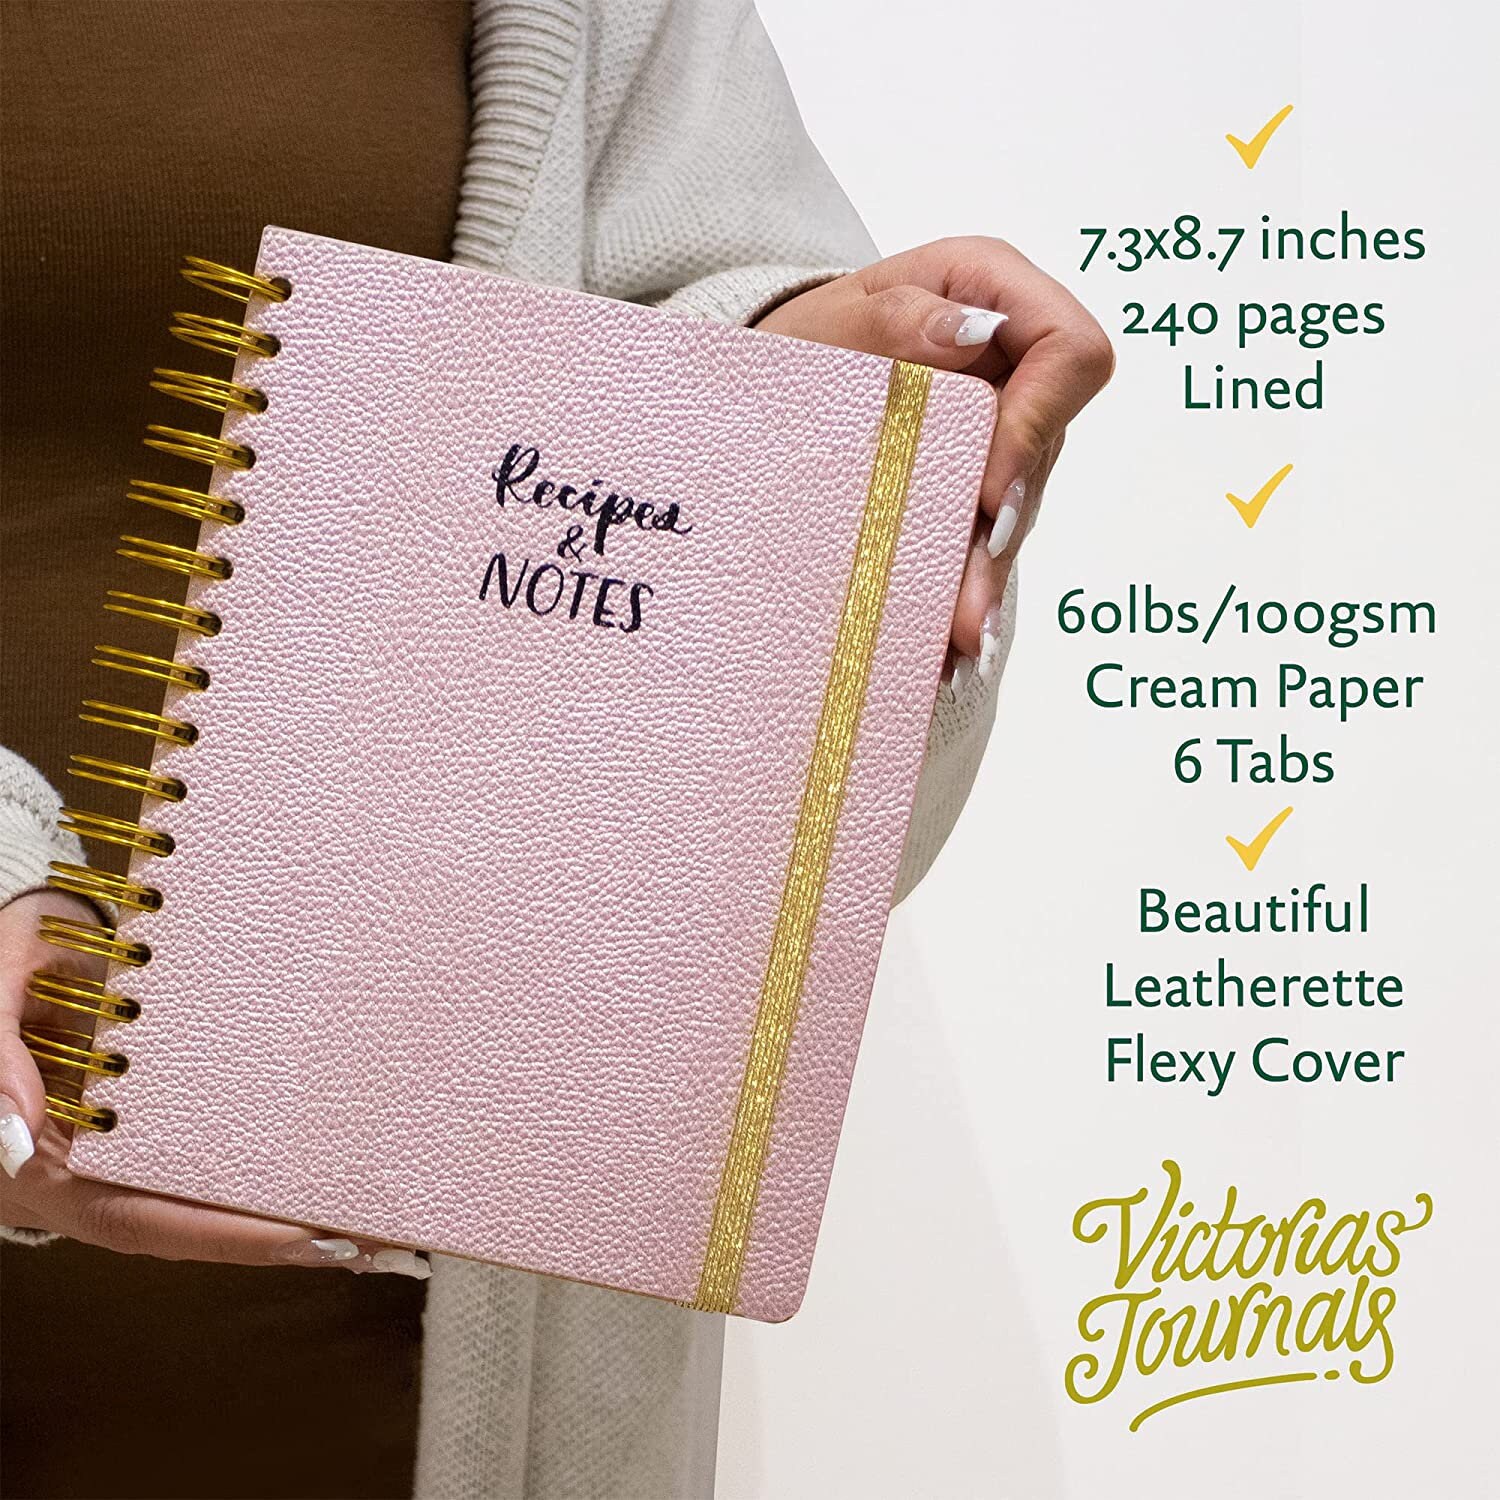 Recipe Book to Write in Your Own Recipes, Sprial Personal Blank